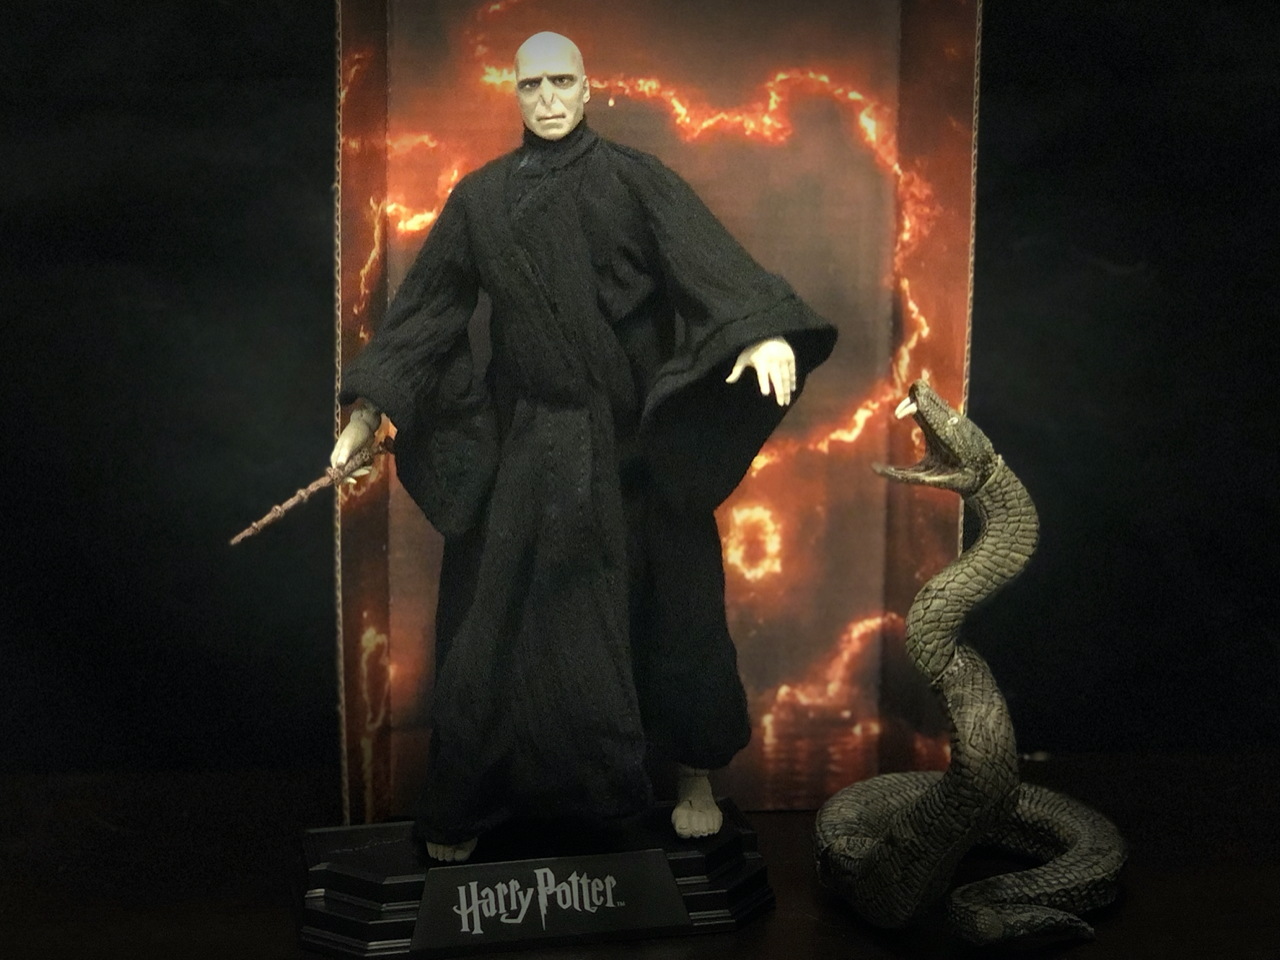 McFarlane Toys Harry Potter Lord Voldemort Action Figure 2019 for sale online